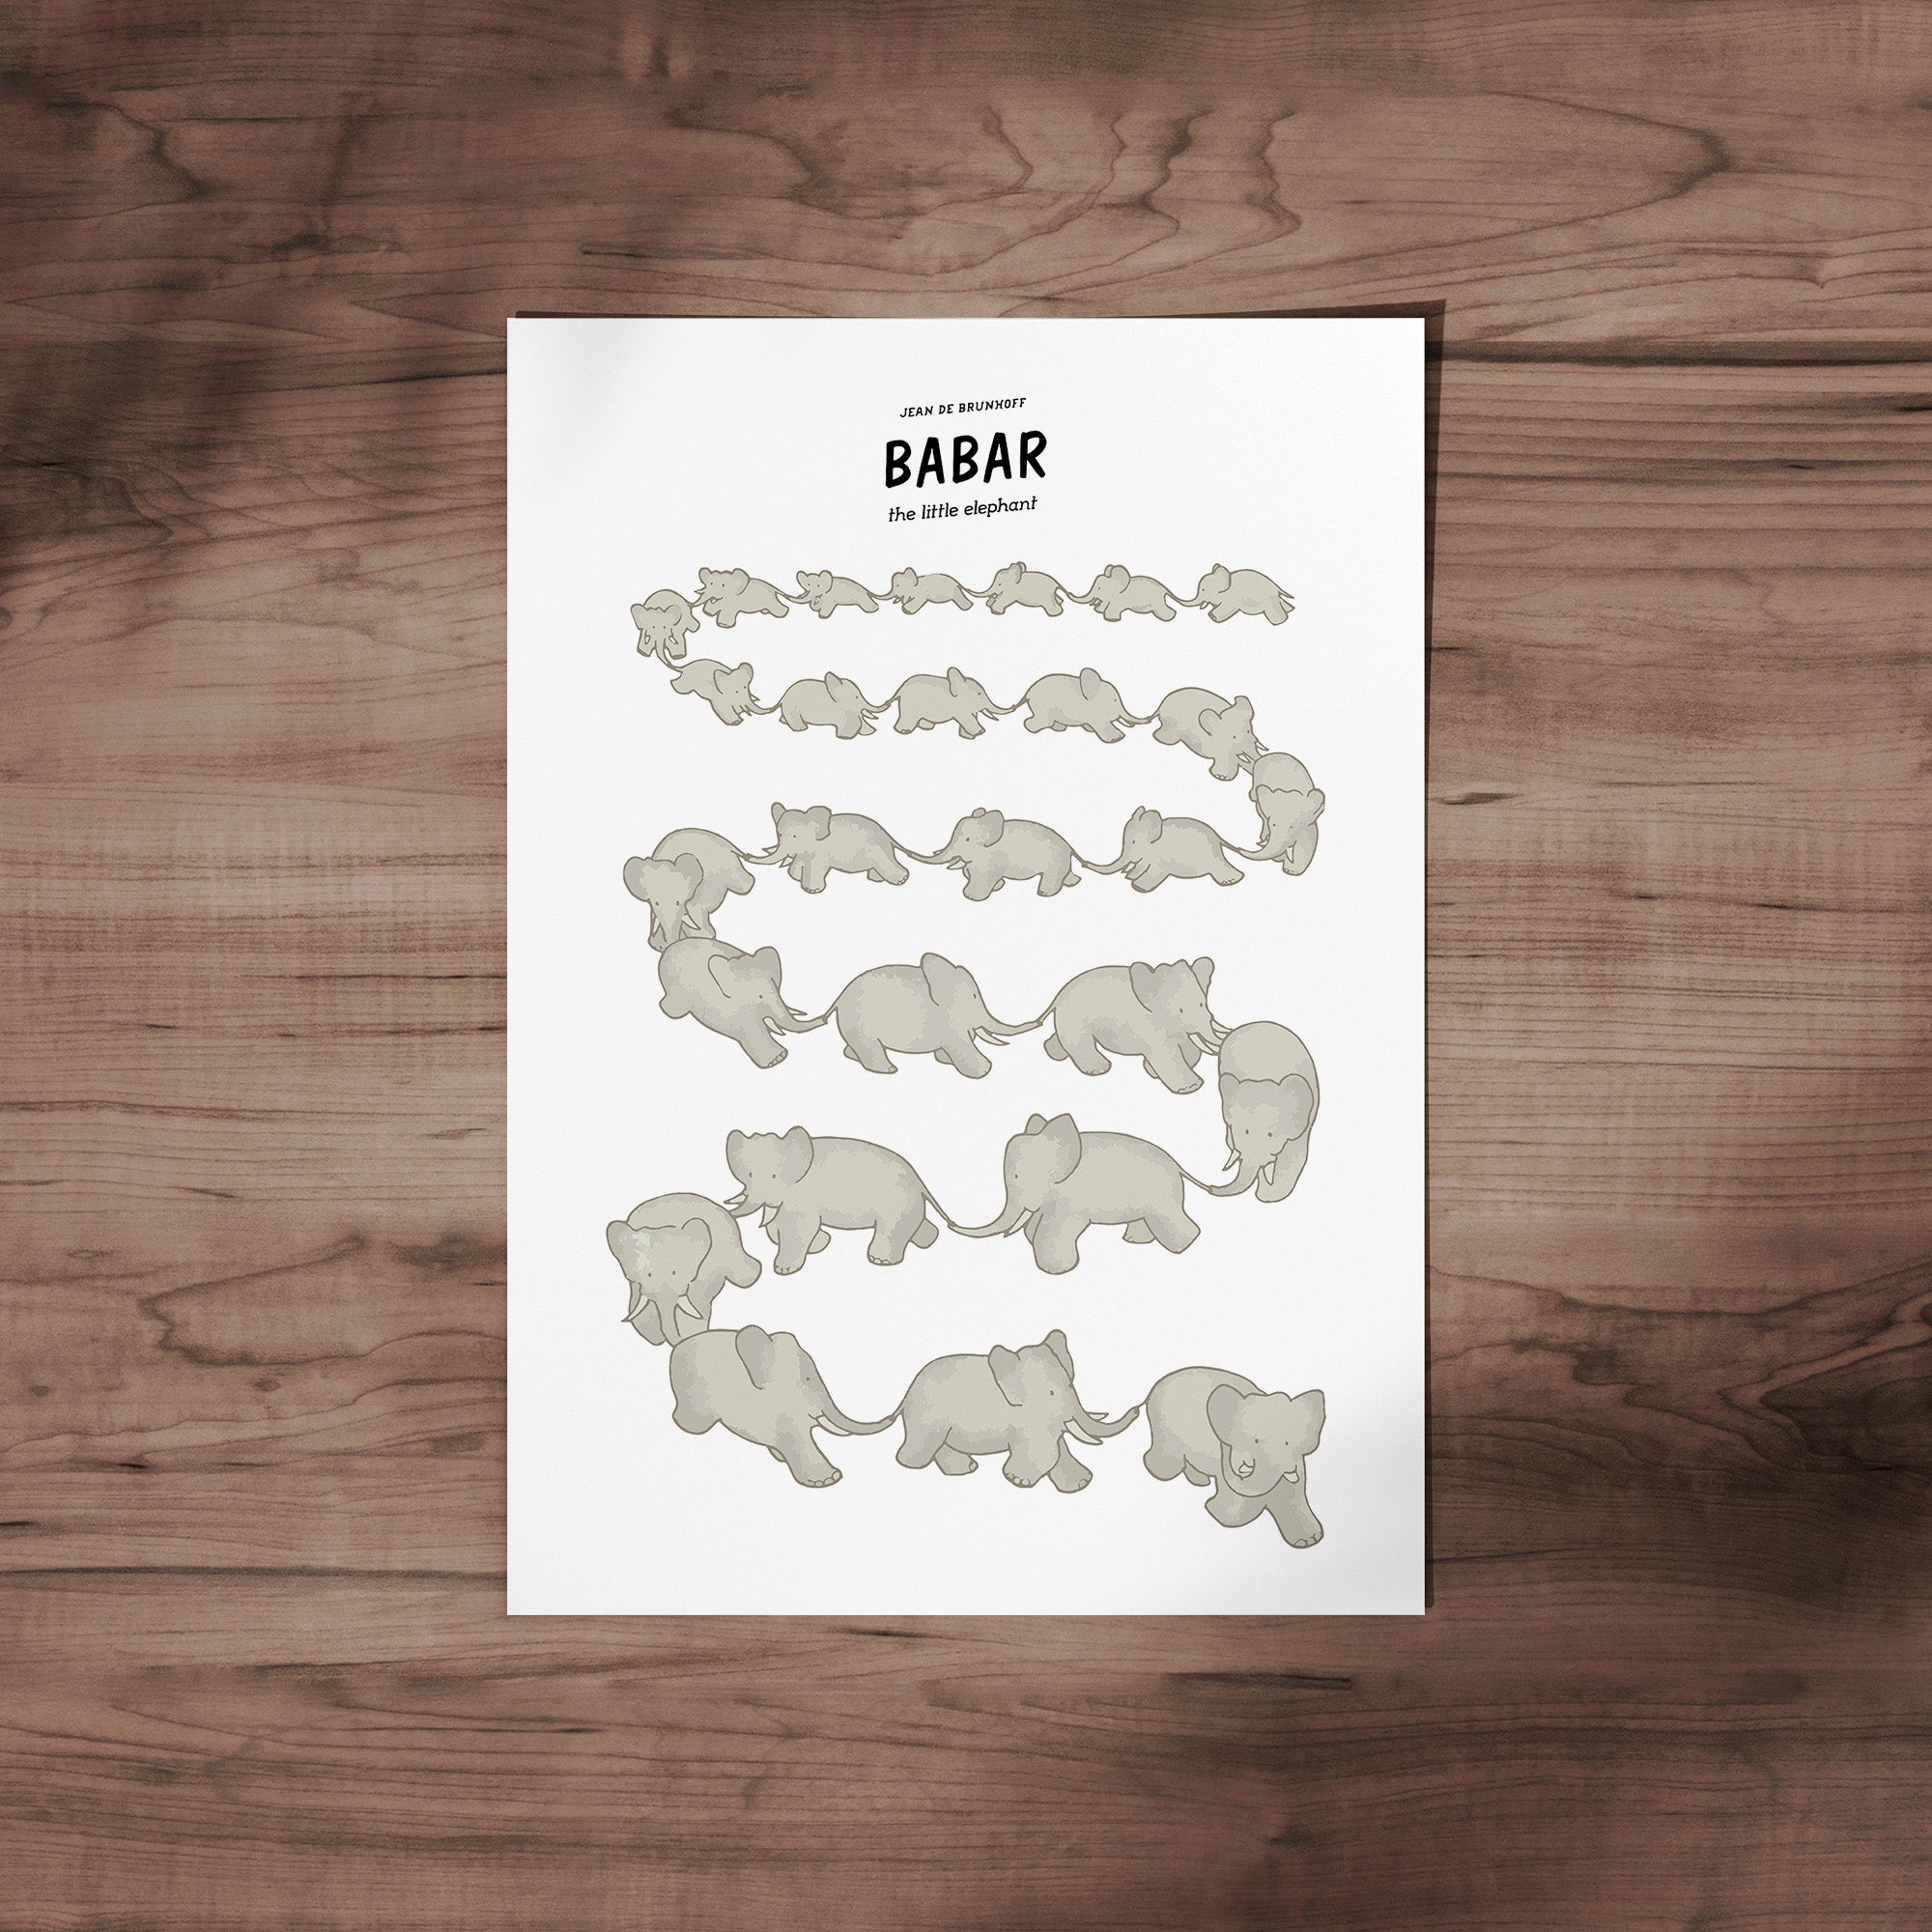 Babar's March Of The Elephants (White)